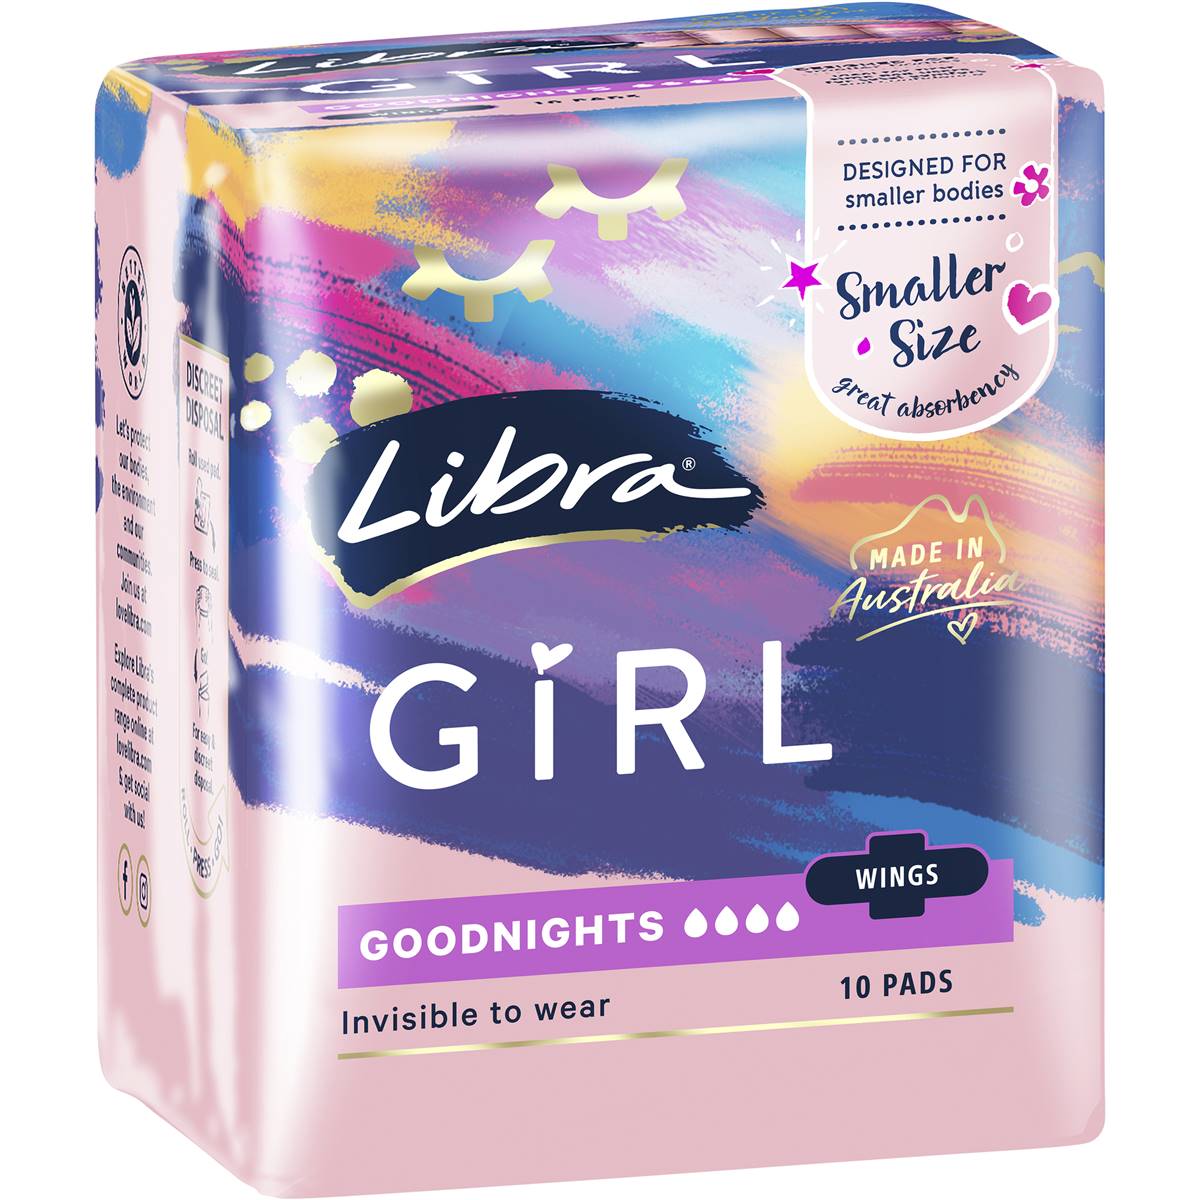 Libra Girl Good Night Pads With Wings 10 Pack